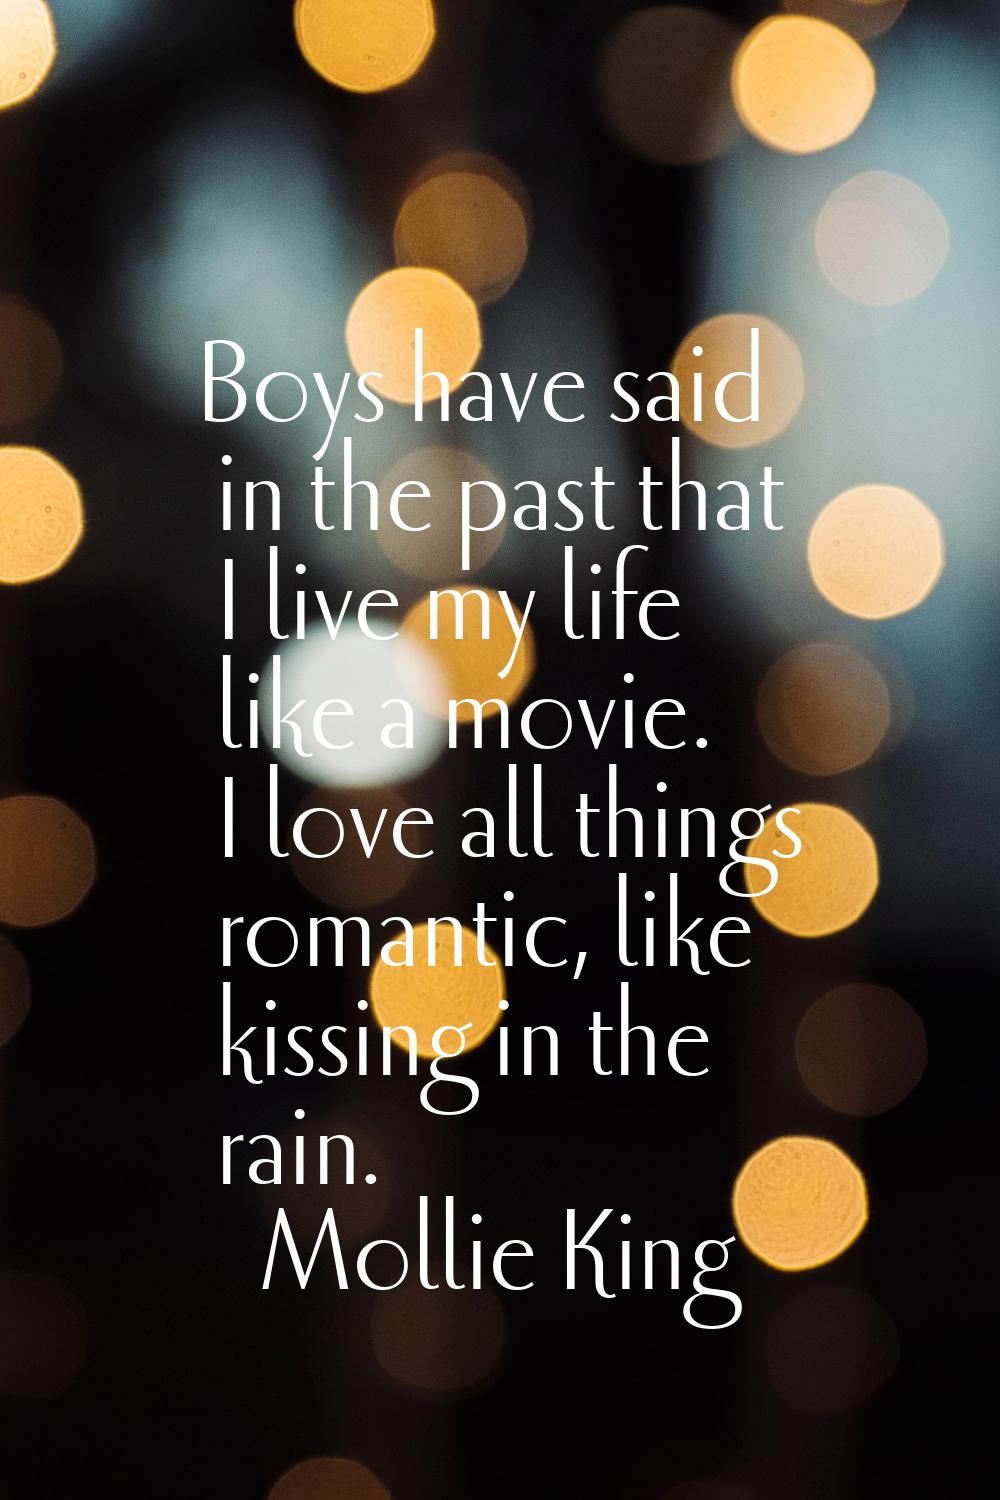 Boys have said in the past that I live my life like a movie. I love all things romantic, like kissi